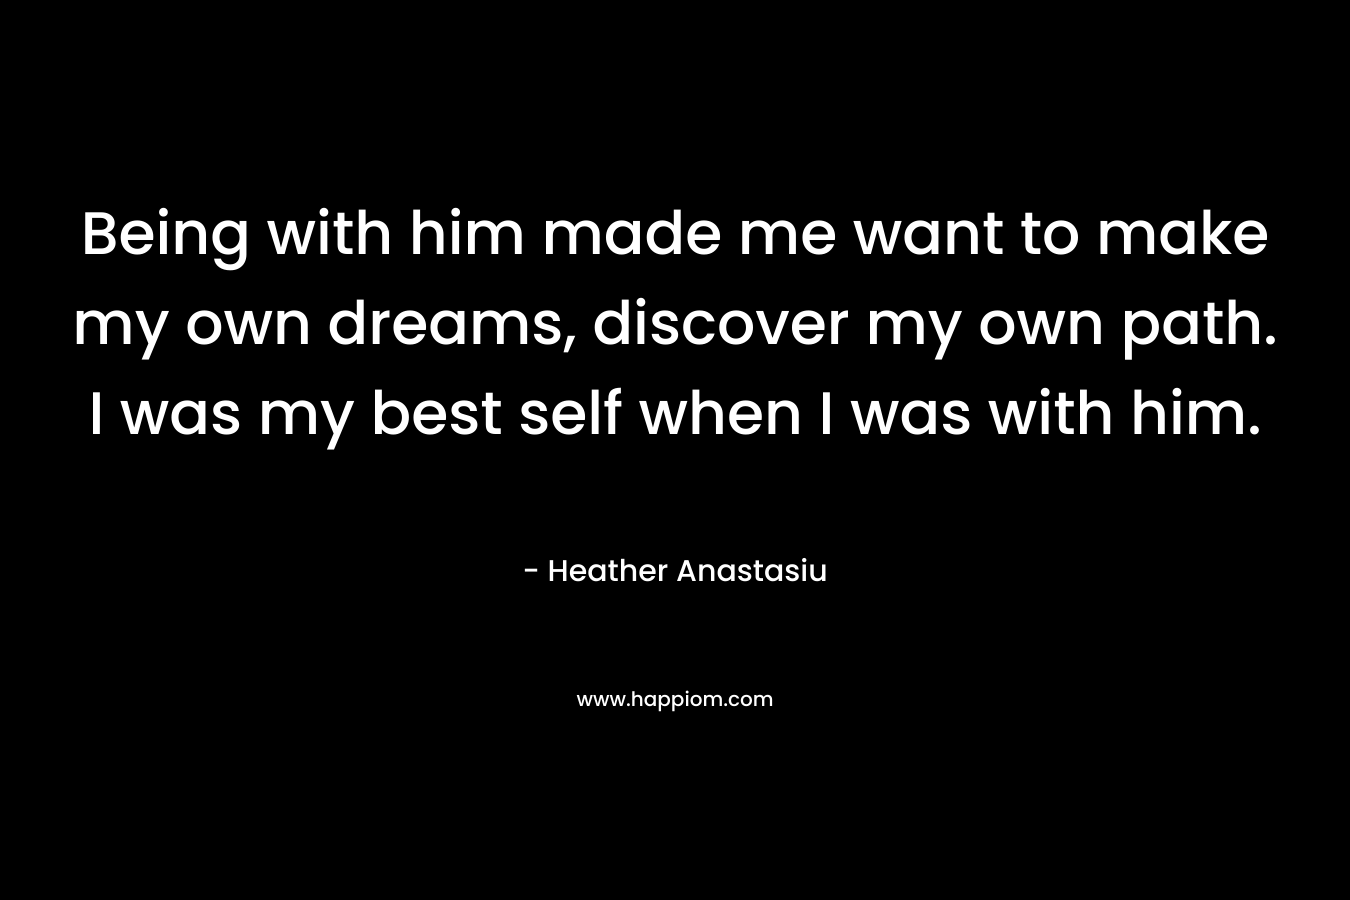 Being with him made me want to make my own dreams, discover my own path. I was my best self when I was with him. – Heather Anastasiu